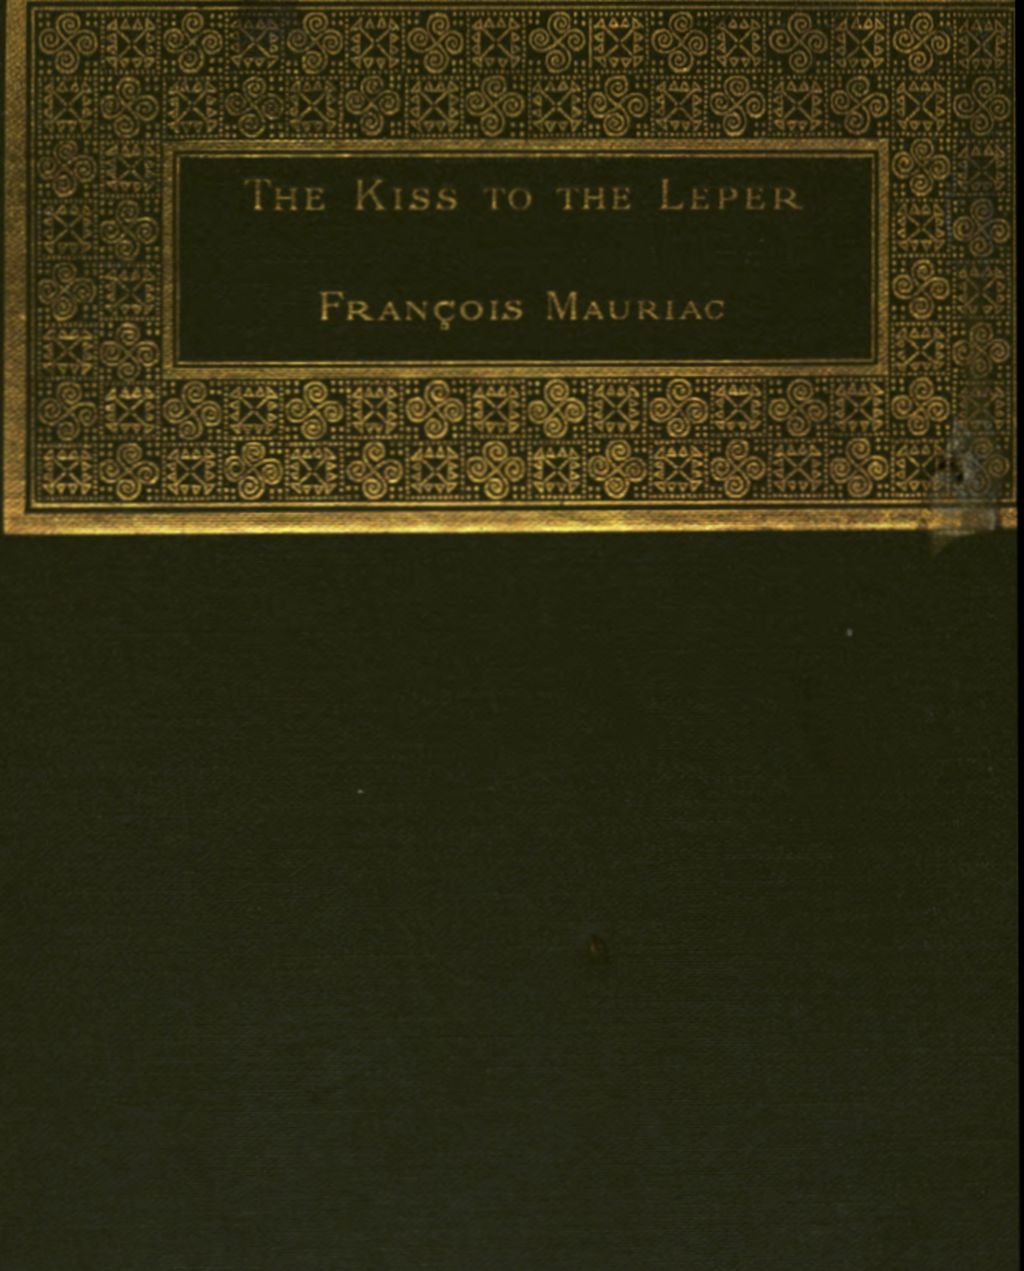 The kiss to the leper